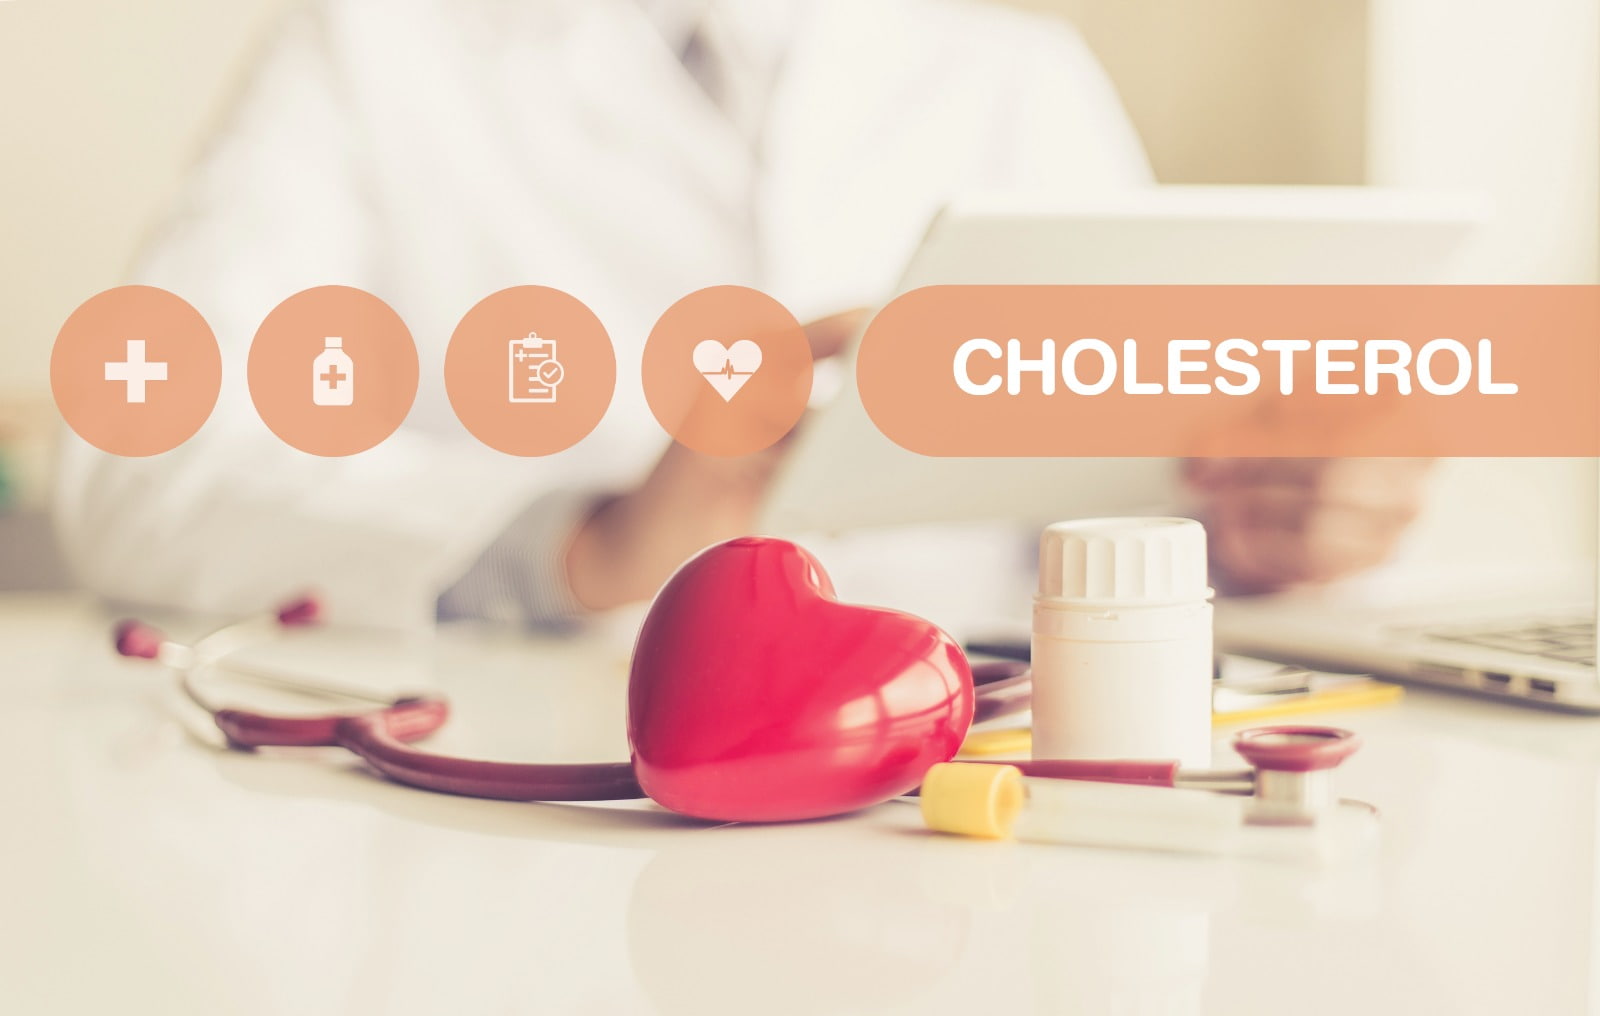 Role of cholesterol in heart health